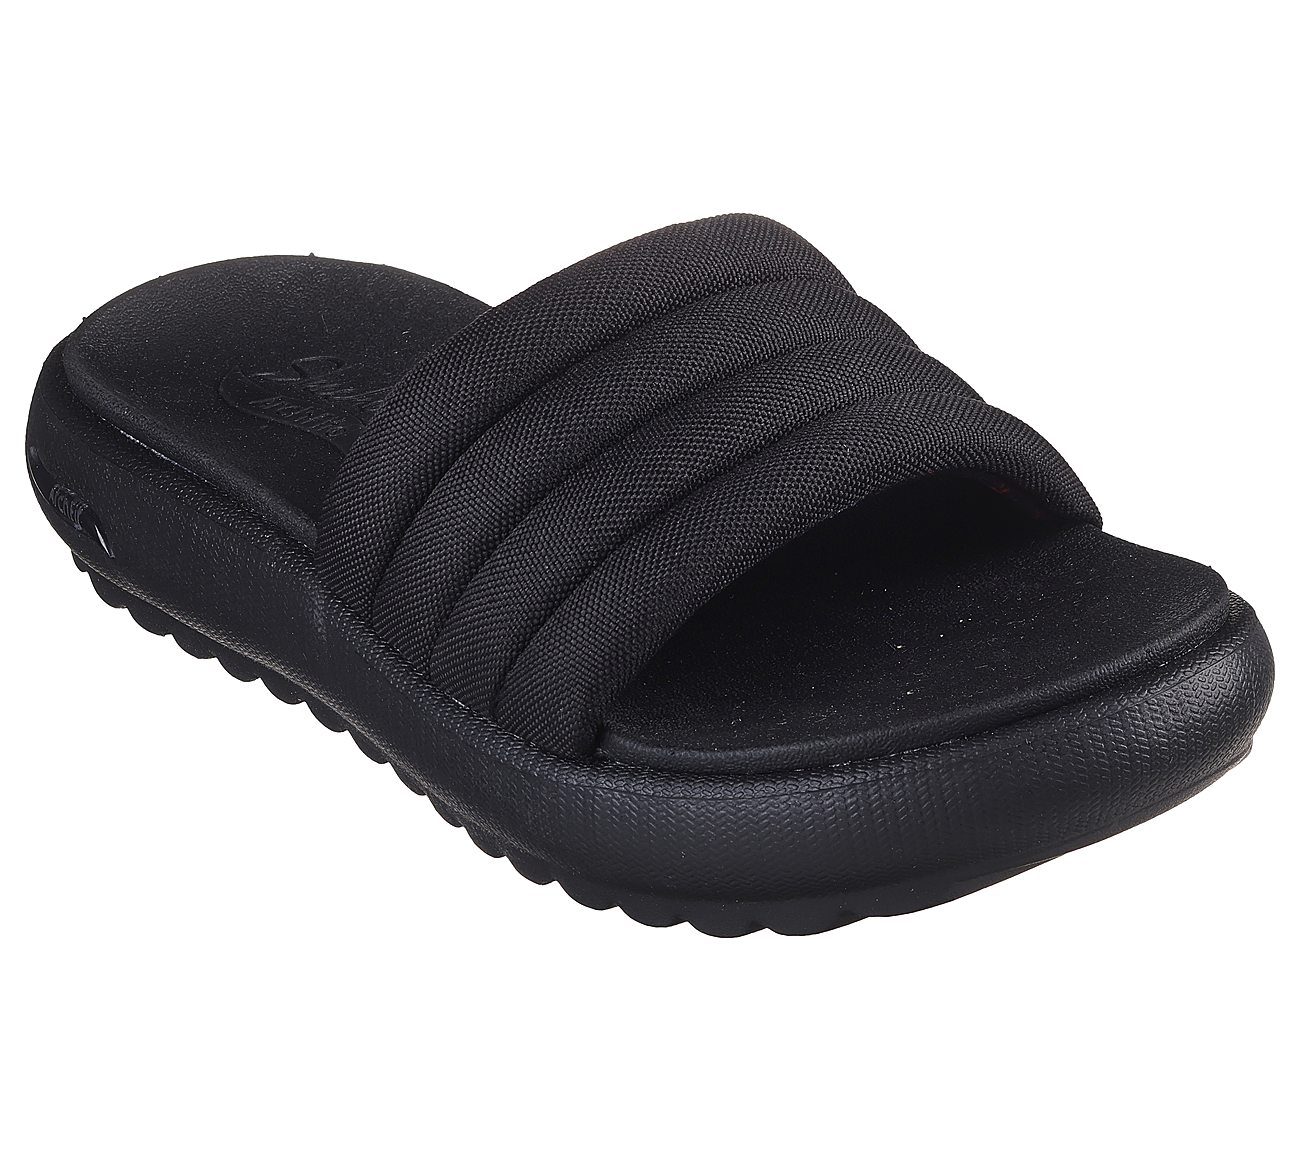 ARCH FIT CLOUD, BBLACK Footwear Right View